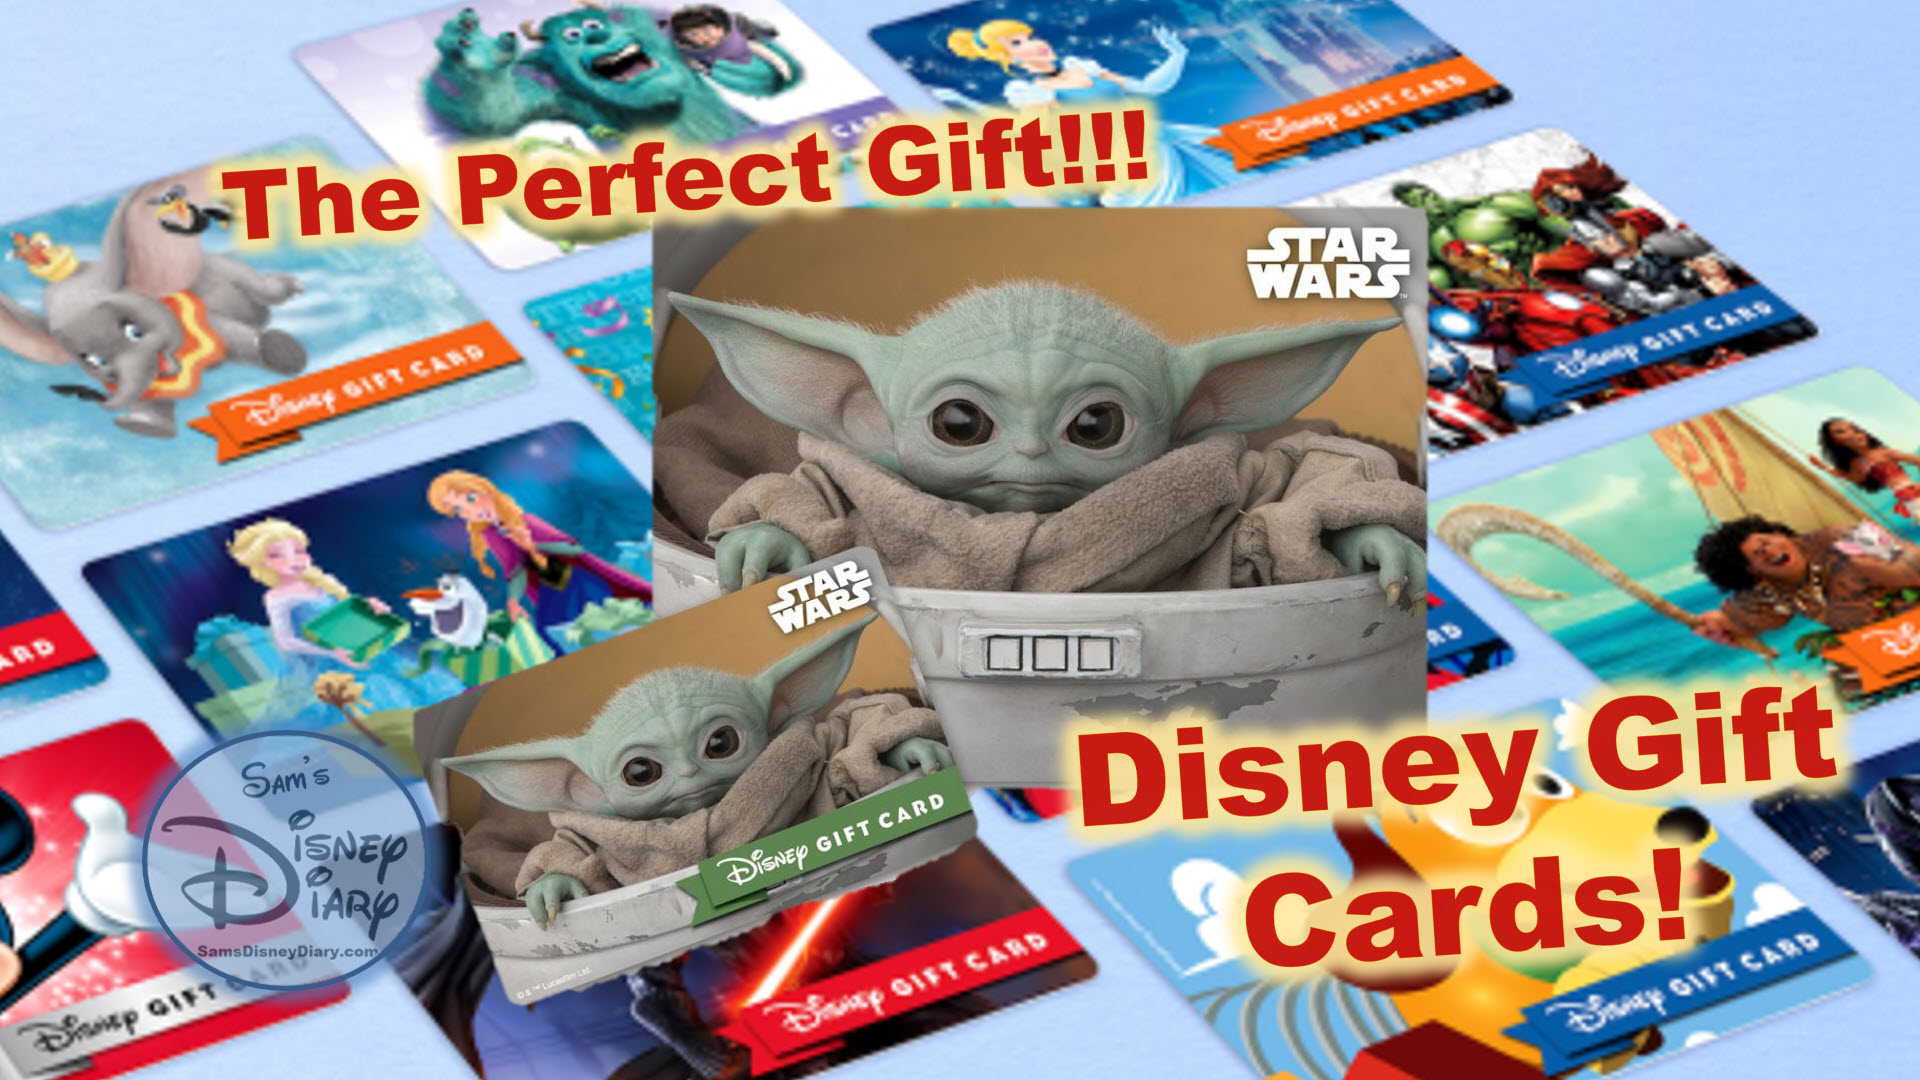 Disney Gift Cards The Perfect Gift and now over 60 designs